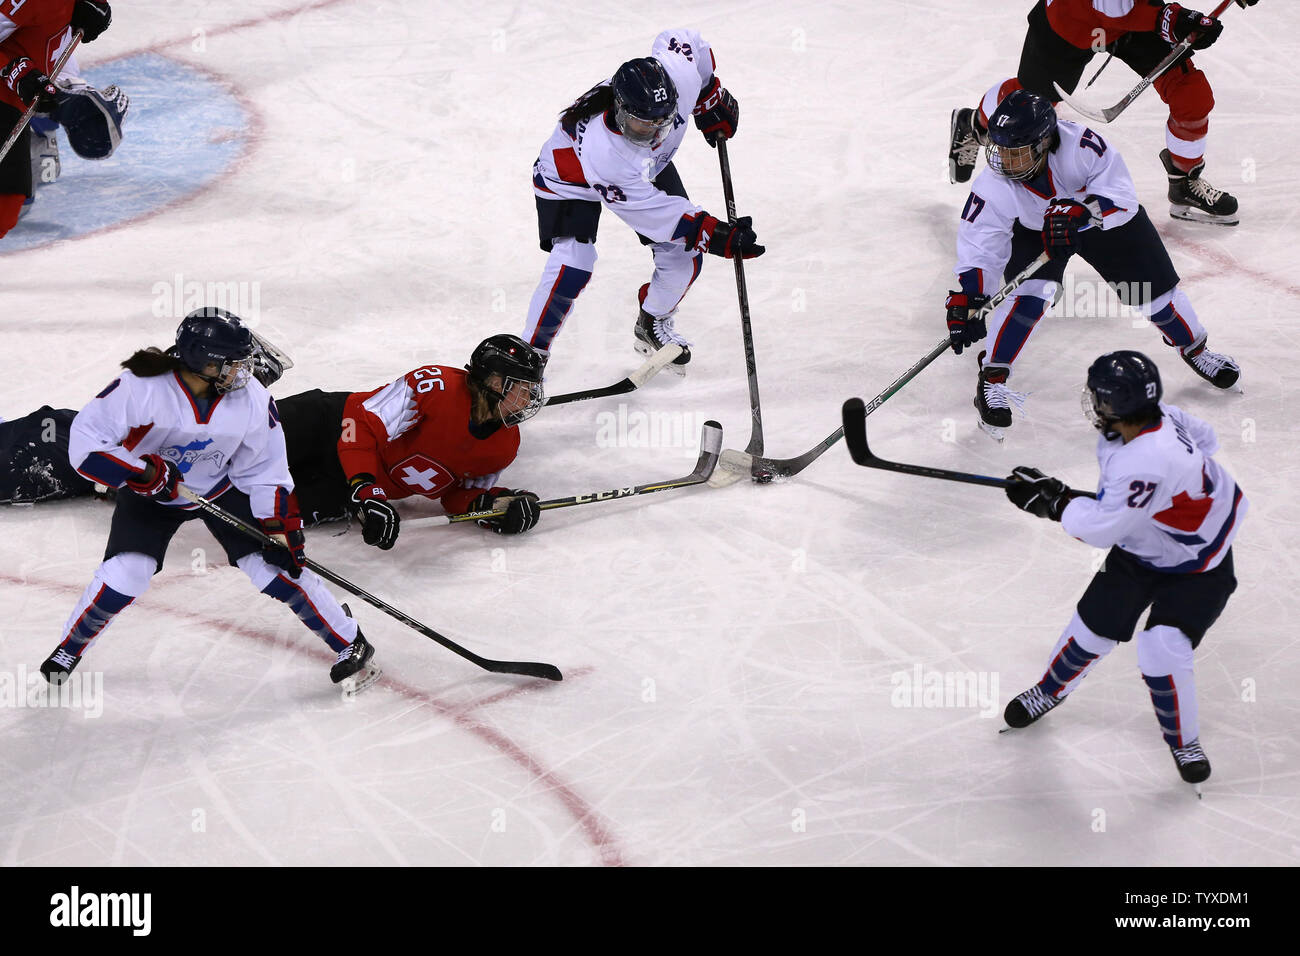 Dominique Ruegg (#26) of Switzerland is checked by Park Yoon-jung (#23), Han Soo-jin (#17) and Jong Su-hyon (#27) of the joint North and South Korean team during the Women's Ice Hockey Preliminary Round - Group B game at the Kwandong Hockey Center in Gangneung, South Korea during the 2018 Pyeongchang Winter Olympics on February 10, 2018. The joint North and South Korean ice hockey team competed together as 'Korea' under the unified flag at the Winter Olympics. Switzerland won 8-0.  Photo by Andrew Wong/UPI Stock Photo